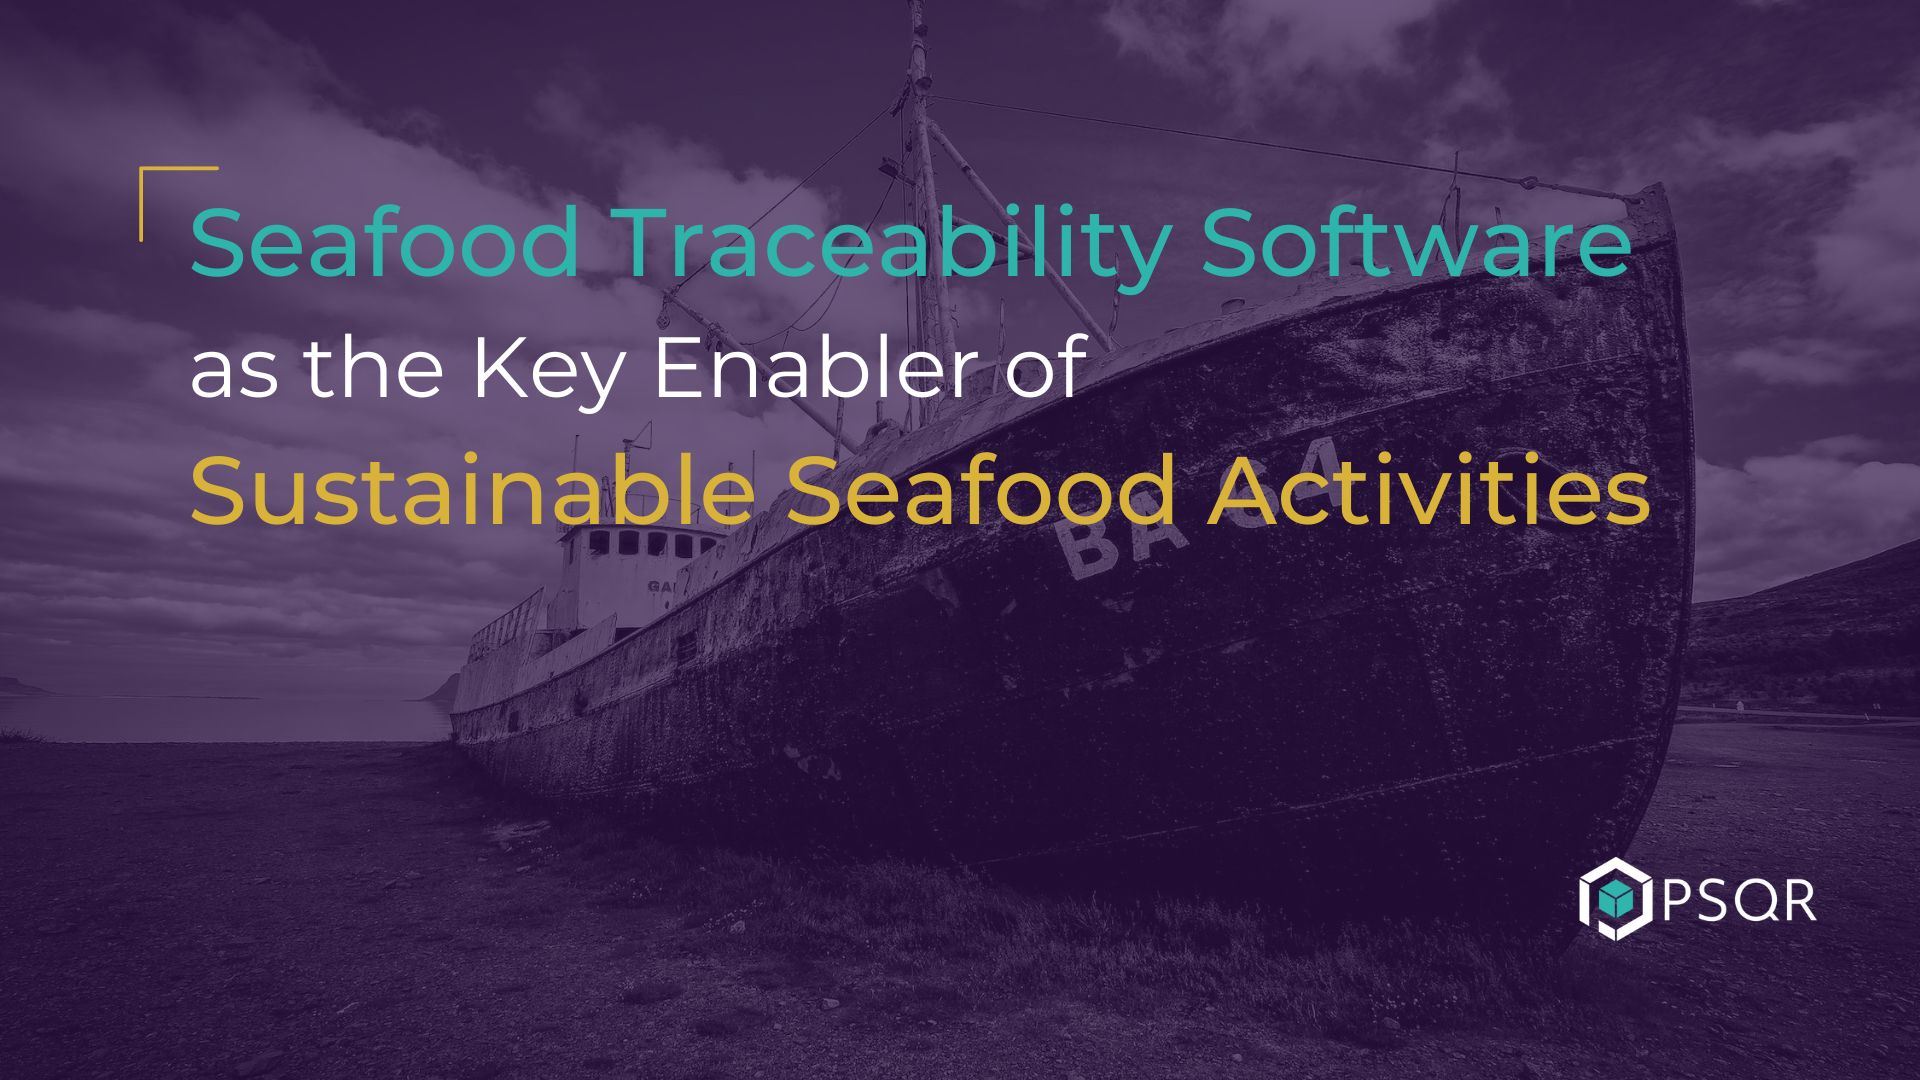 Seafood traceability software as a key enabler of sustainable seafood